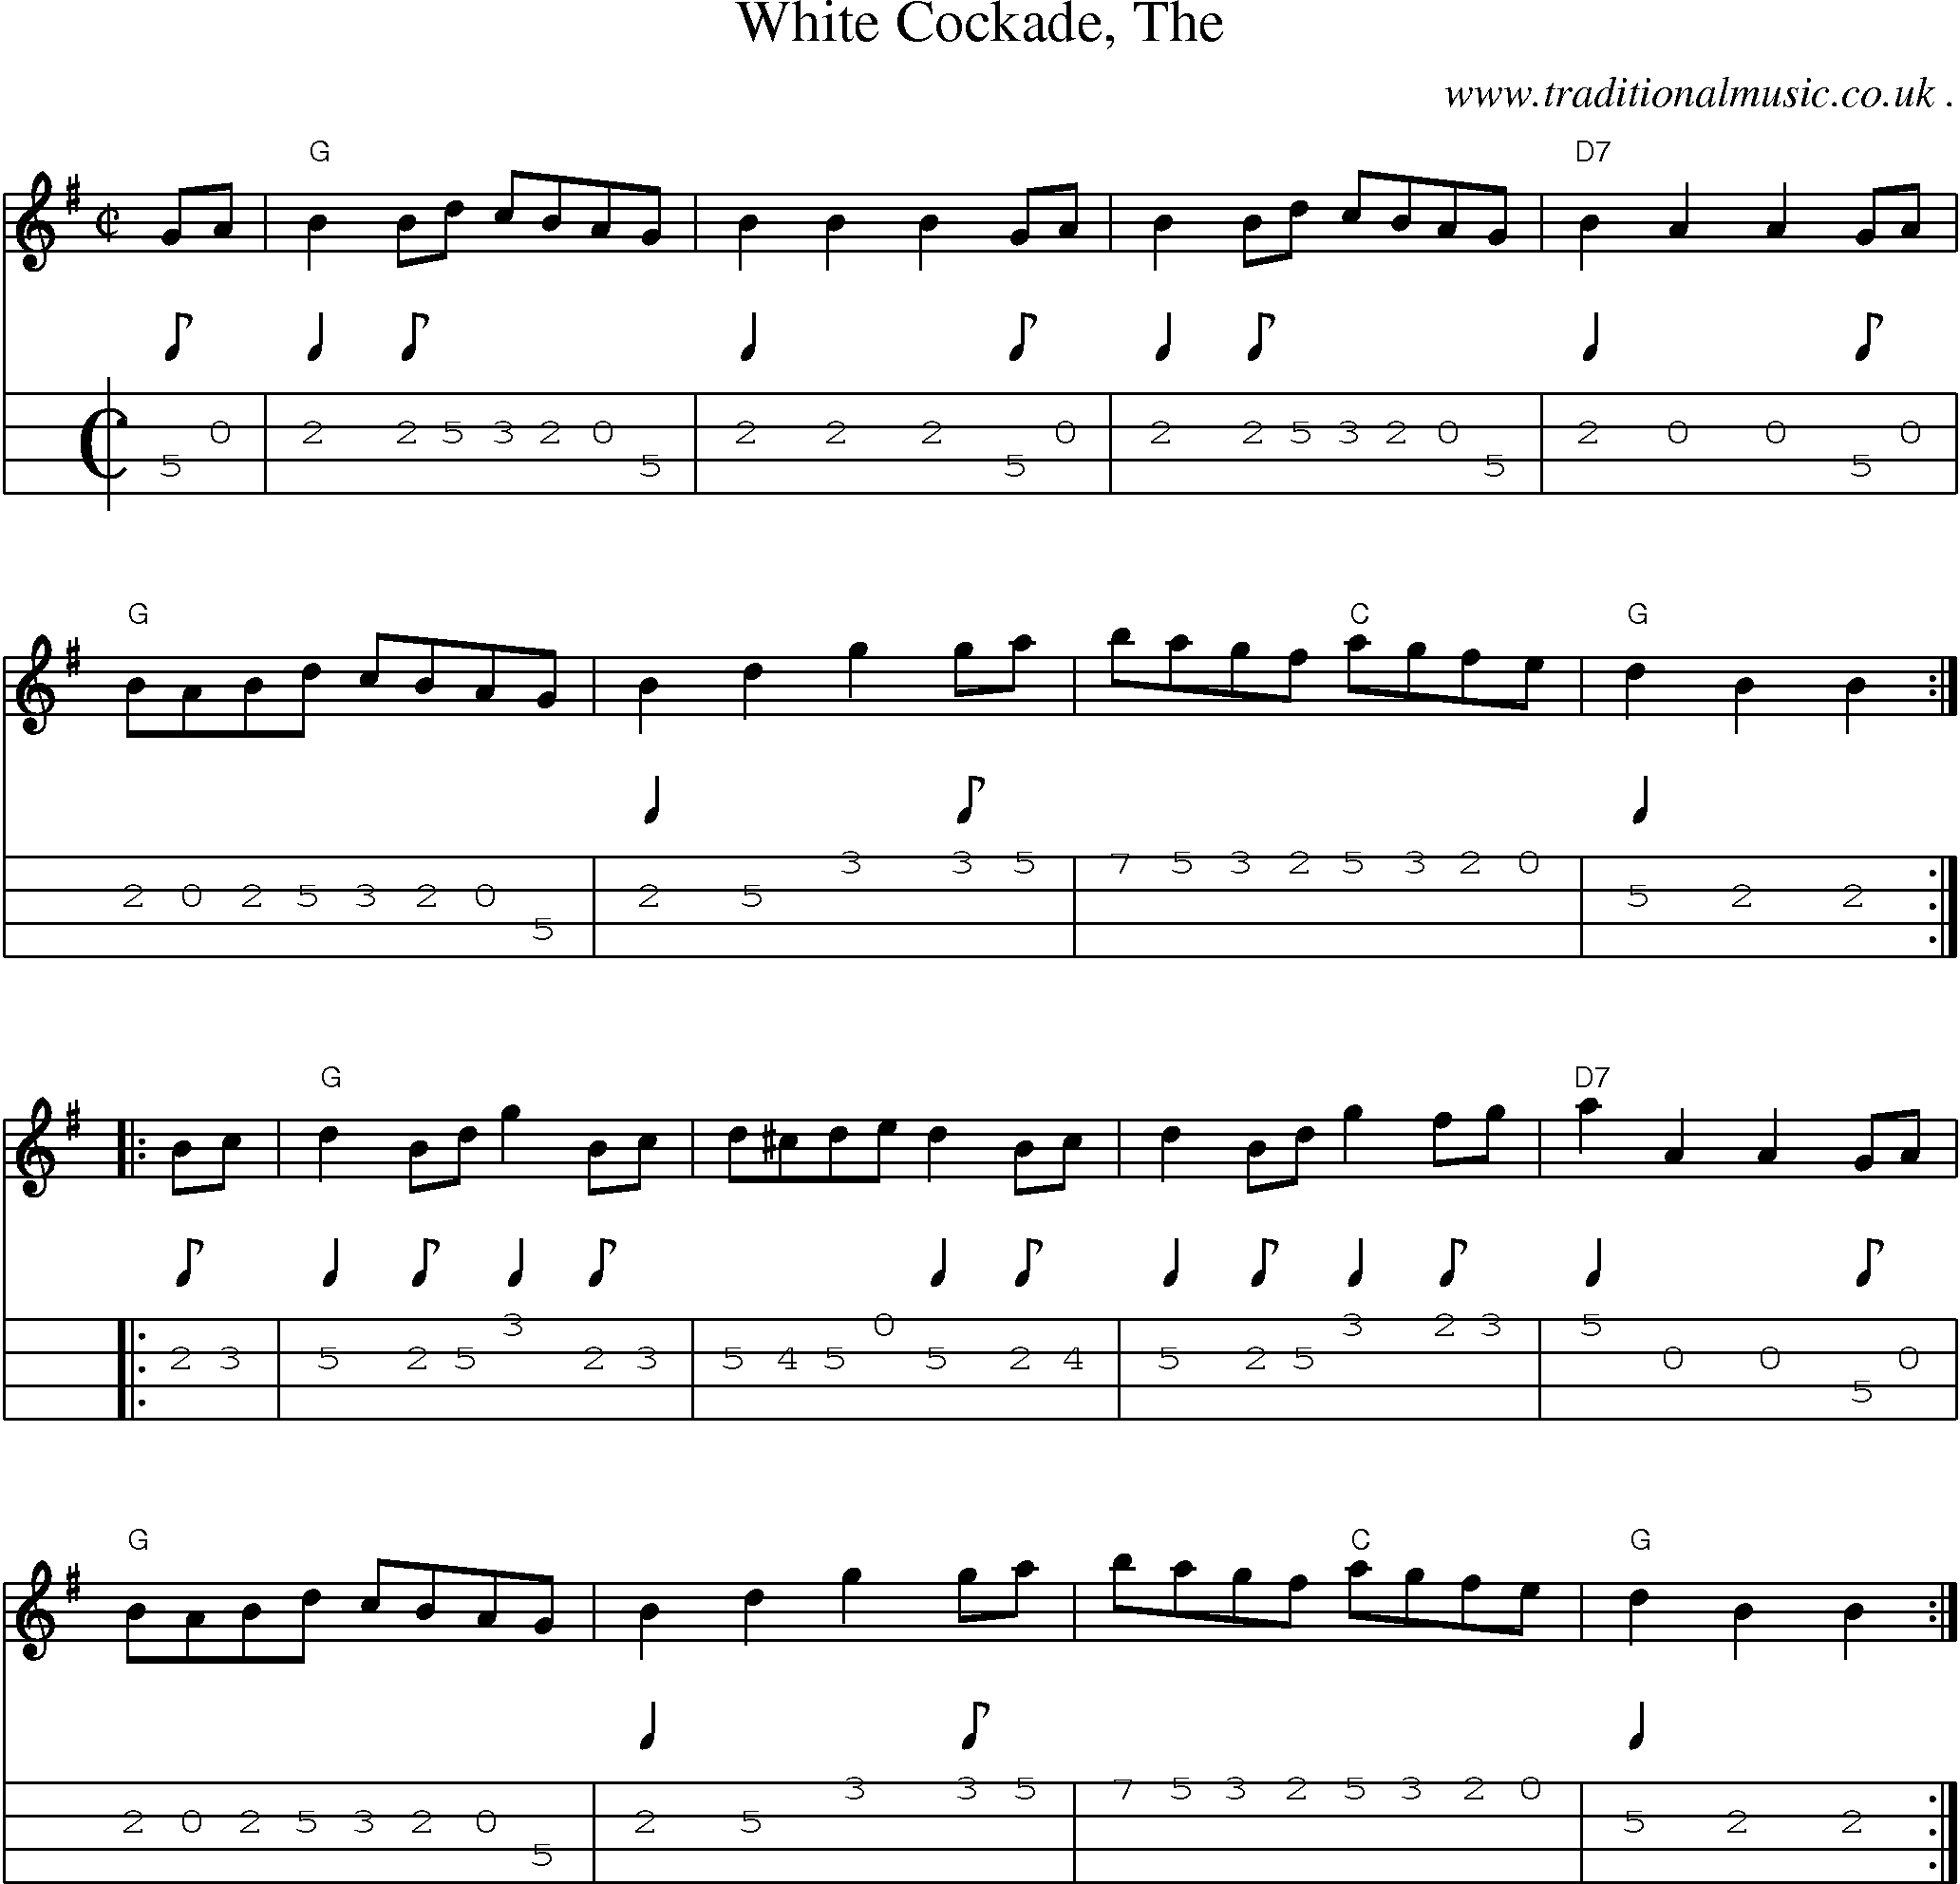 Music Score and Guitar Tabs for White Cockade The